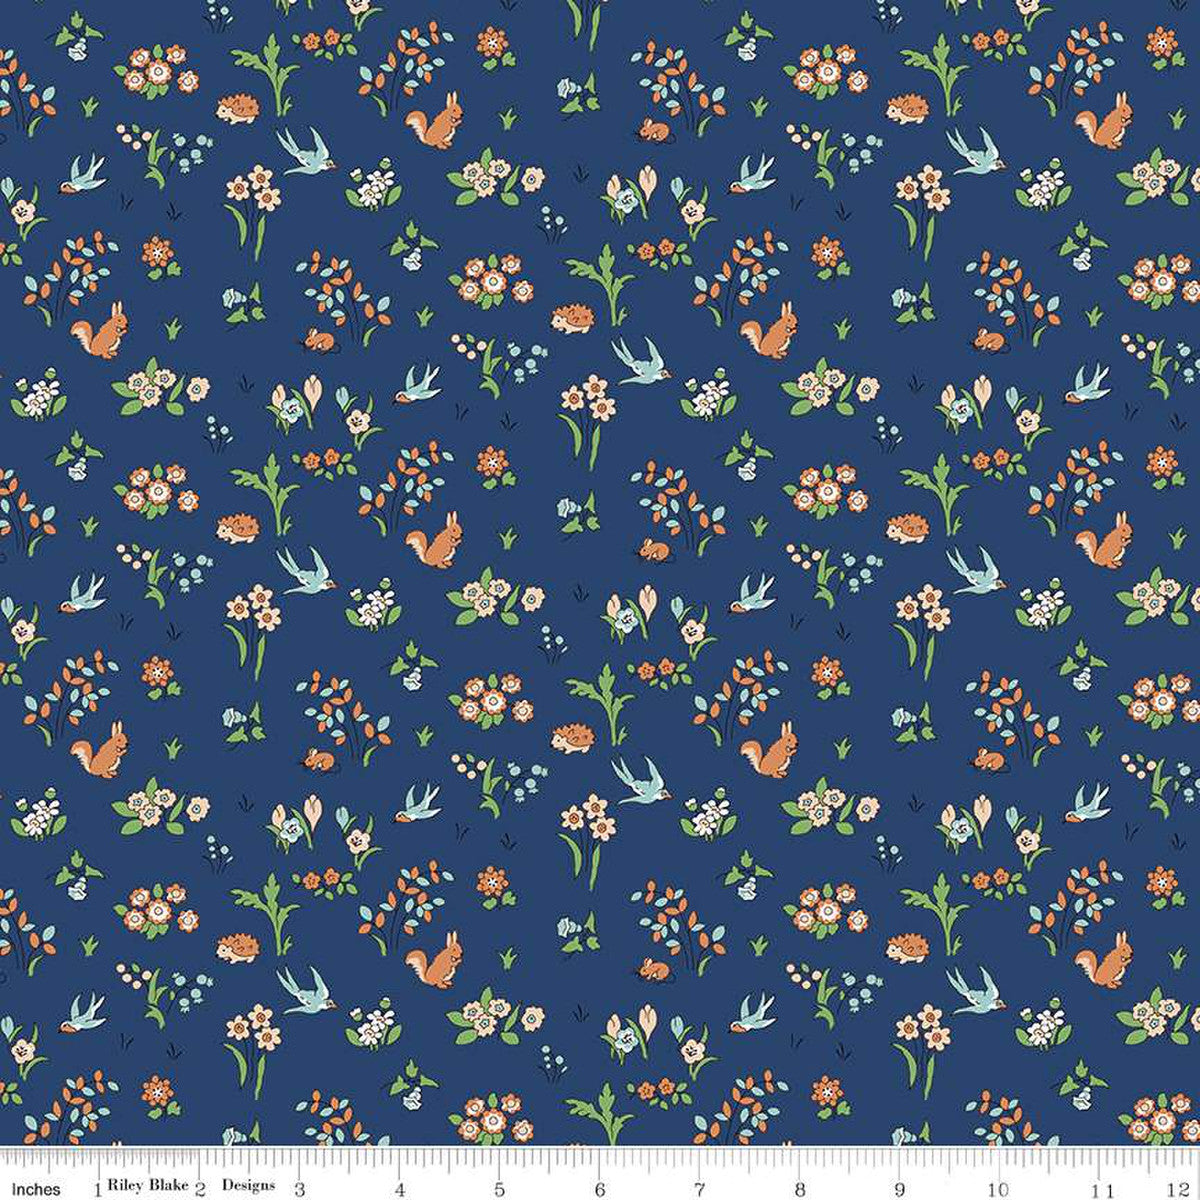 LIberty Woodland Walk Autumn Berries Forest Friends C royal blue background tossed small squirrels hedgehogs bluebirds flowers bunny rabbits green aqua quilt weight cotton 